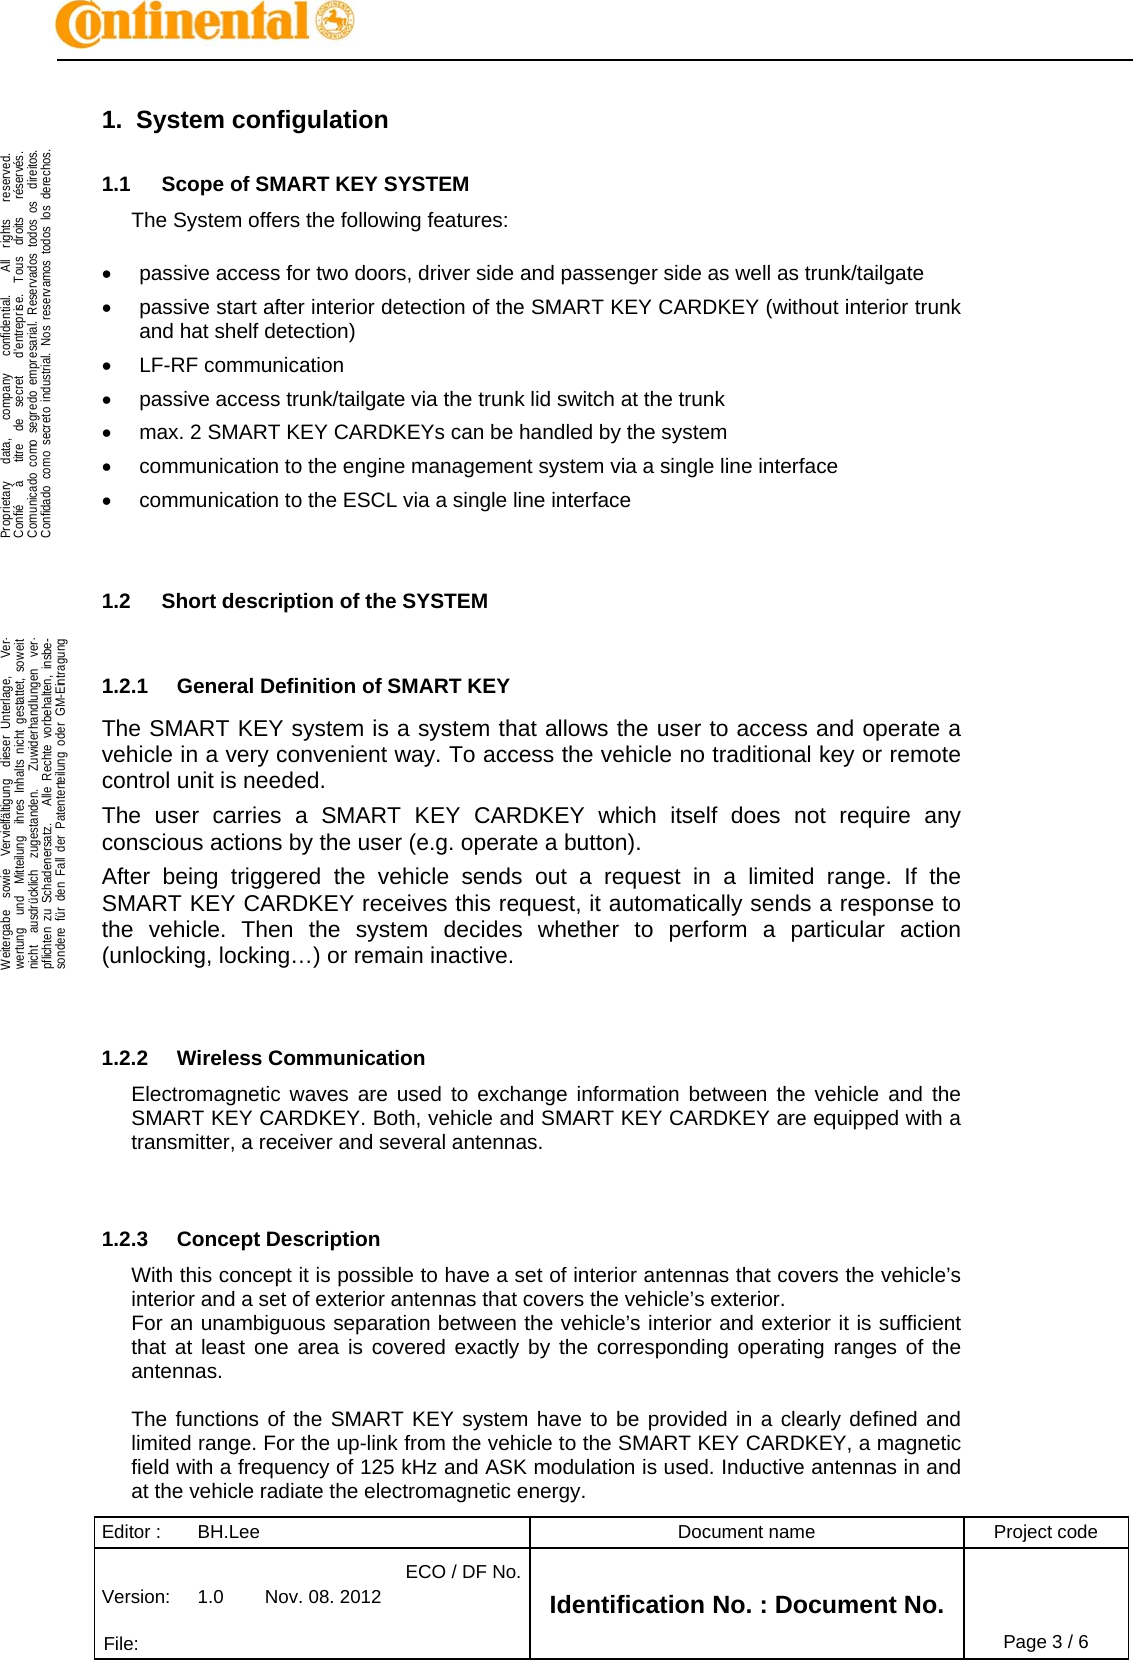 Editor :  BH.Lee  Document name  Project code Version:  1.0  Nov. 08. 2012 ECO / DF No.Identification No. : Document No. File:   Page 3 / 6 .Proprietary   data,   company   confidential.    All  rights   reserved.Confié à  titre  de  secret  d&apos;entreprise. Tous droits réservés.Comunicado como segredo empresarial. Reservados todos os  direitos.Confidado como secreto industrial. Nos reservamos todos los derechos. .Weitergabe  sowie  Vervielfältigung  dieser Unterlage,   Ver-wertung  und  Mitteilung  ihres Inhalts nicht gestattet, soweitnicht  ausdrücklich  zugestanden.   Zuwiderhandlungen  ver-pflichten zu Schadenersatz.   Alle Rechte vorbehalten, insbe-sondere für den Fall der Patenterteilung oder GM-Eintragung1. System configulation1.1  Scope of SMART KEY SYSTEM The System offers the following features: passive access for two doors, driver side and passenger side as well as trunk/tailgatepassive start after interior detection of the SMART KEY CARDKEY (without interior trunkand hat shelf detection)LF-RF communicationpassive access trunk/tailgate via the trunk lid switch at the trunkmax. 2 SMART KEY CARDKEYs can be handled by the systemcommunication to the engine management system via a single line interfacecommunication to the ESCL via a single line interface1.2  Short description of the SYSTEM 1.2.1  General Definition of SMART KEY The SMART KEY system is a system that allows the user to access and operate a vehicle in a very convenient way. To access the vehicle no traditional key or remote control unit is needed.  The user carries a SMART KEY CARDKEY which itself does not require any conscious actions by the user (e.g. operate a button).  After being triggered the vehicle sends out a request in a limited range. If the SMART KEY CARDKEY receives this request, it automatically sends a response to the vehicle. Then the system decides whether to perform a particular action (unlocking, locking…) or remain inactive. 1.2.2 Wireless Communication Electromagnetic waves are used to exchange information between the vehicle and the SMART KEY CARDKEY. Both, vehicle and SMART KEY CARDKEY are equipped with a transmitter, a receiver and several antennas.  1.2.3 Concept Description With this concept it is possible to have a set of interior antennas that covers the vehicle’s interior and a set of exterior antennas that covers the vehicle’s exterior. For an unambiguous separation between the vehicle’s interior and exterior it is sufficient that at least one area is covered exactly by the corresponding operating ranges of the antennas. The functions of the SMART KEY system have to be provided in a clearly defined and limited range. For the up-link from the vehicle to the SMART KEY CARDKEY, a magnetic field with a frequency of 125 kHz and ASK modulation is used. Inductive antennas in and at the vehicle radiate the electromagnetic energy. 